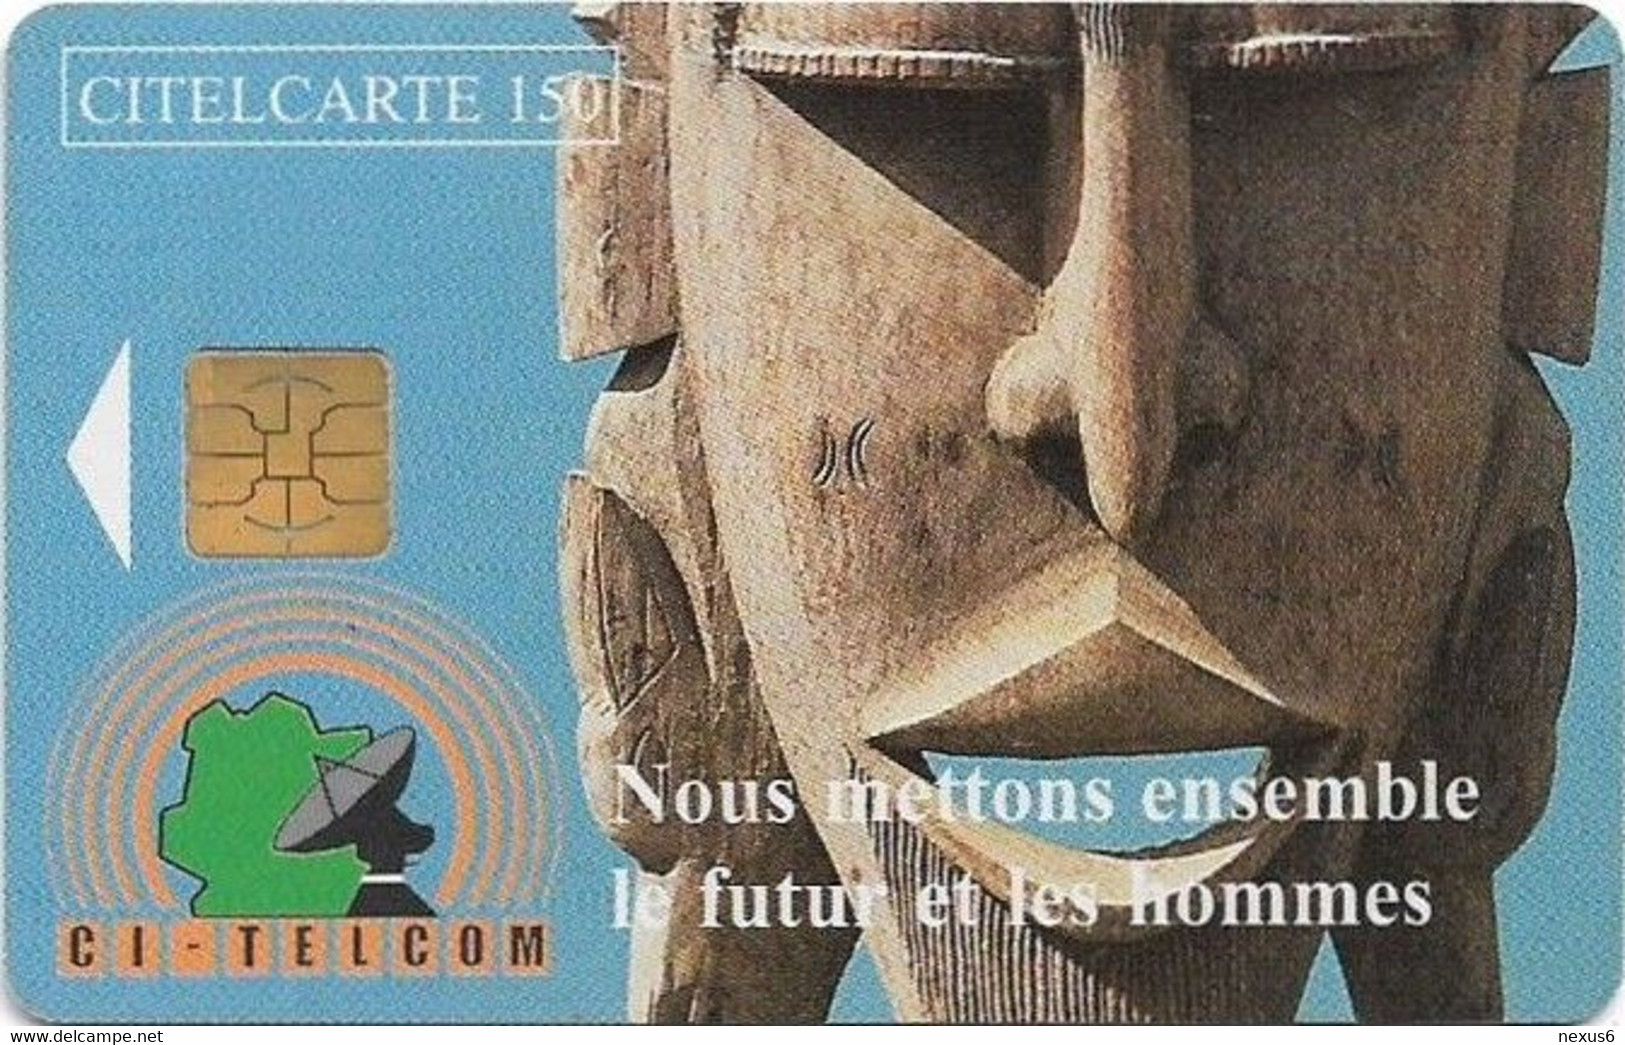 Ivory Coast - CI-Telcom - Carved Mask, Chip Philips, 150Units, 25.500ex, Used - Costa De Marfil